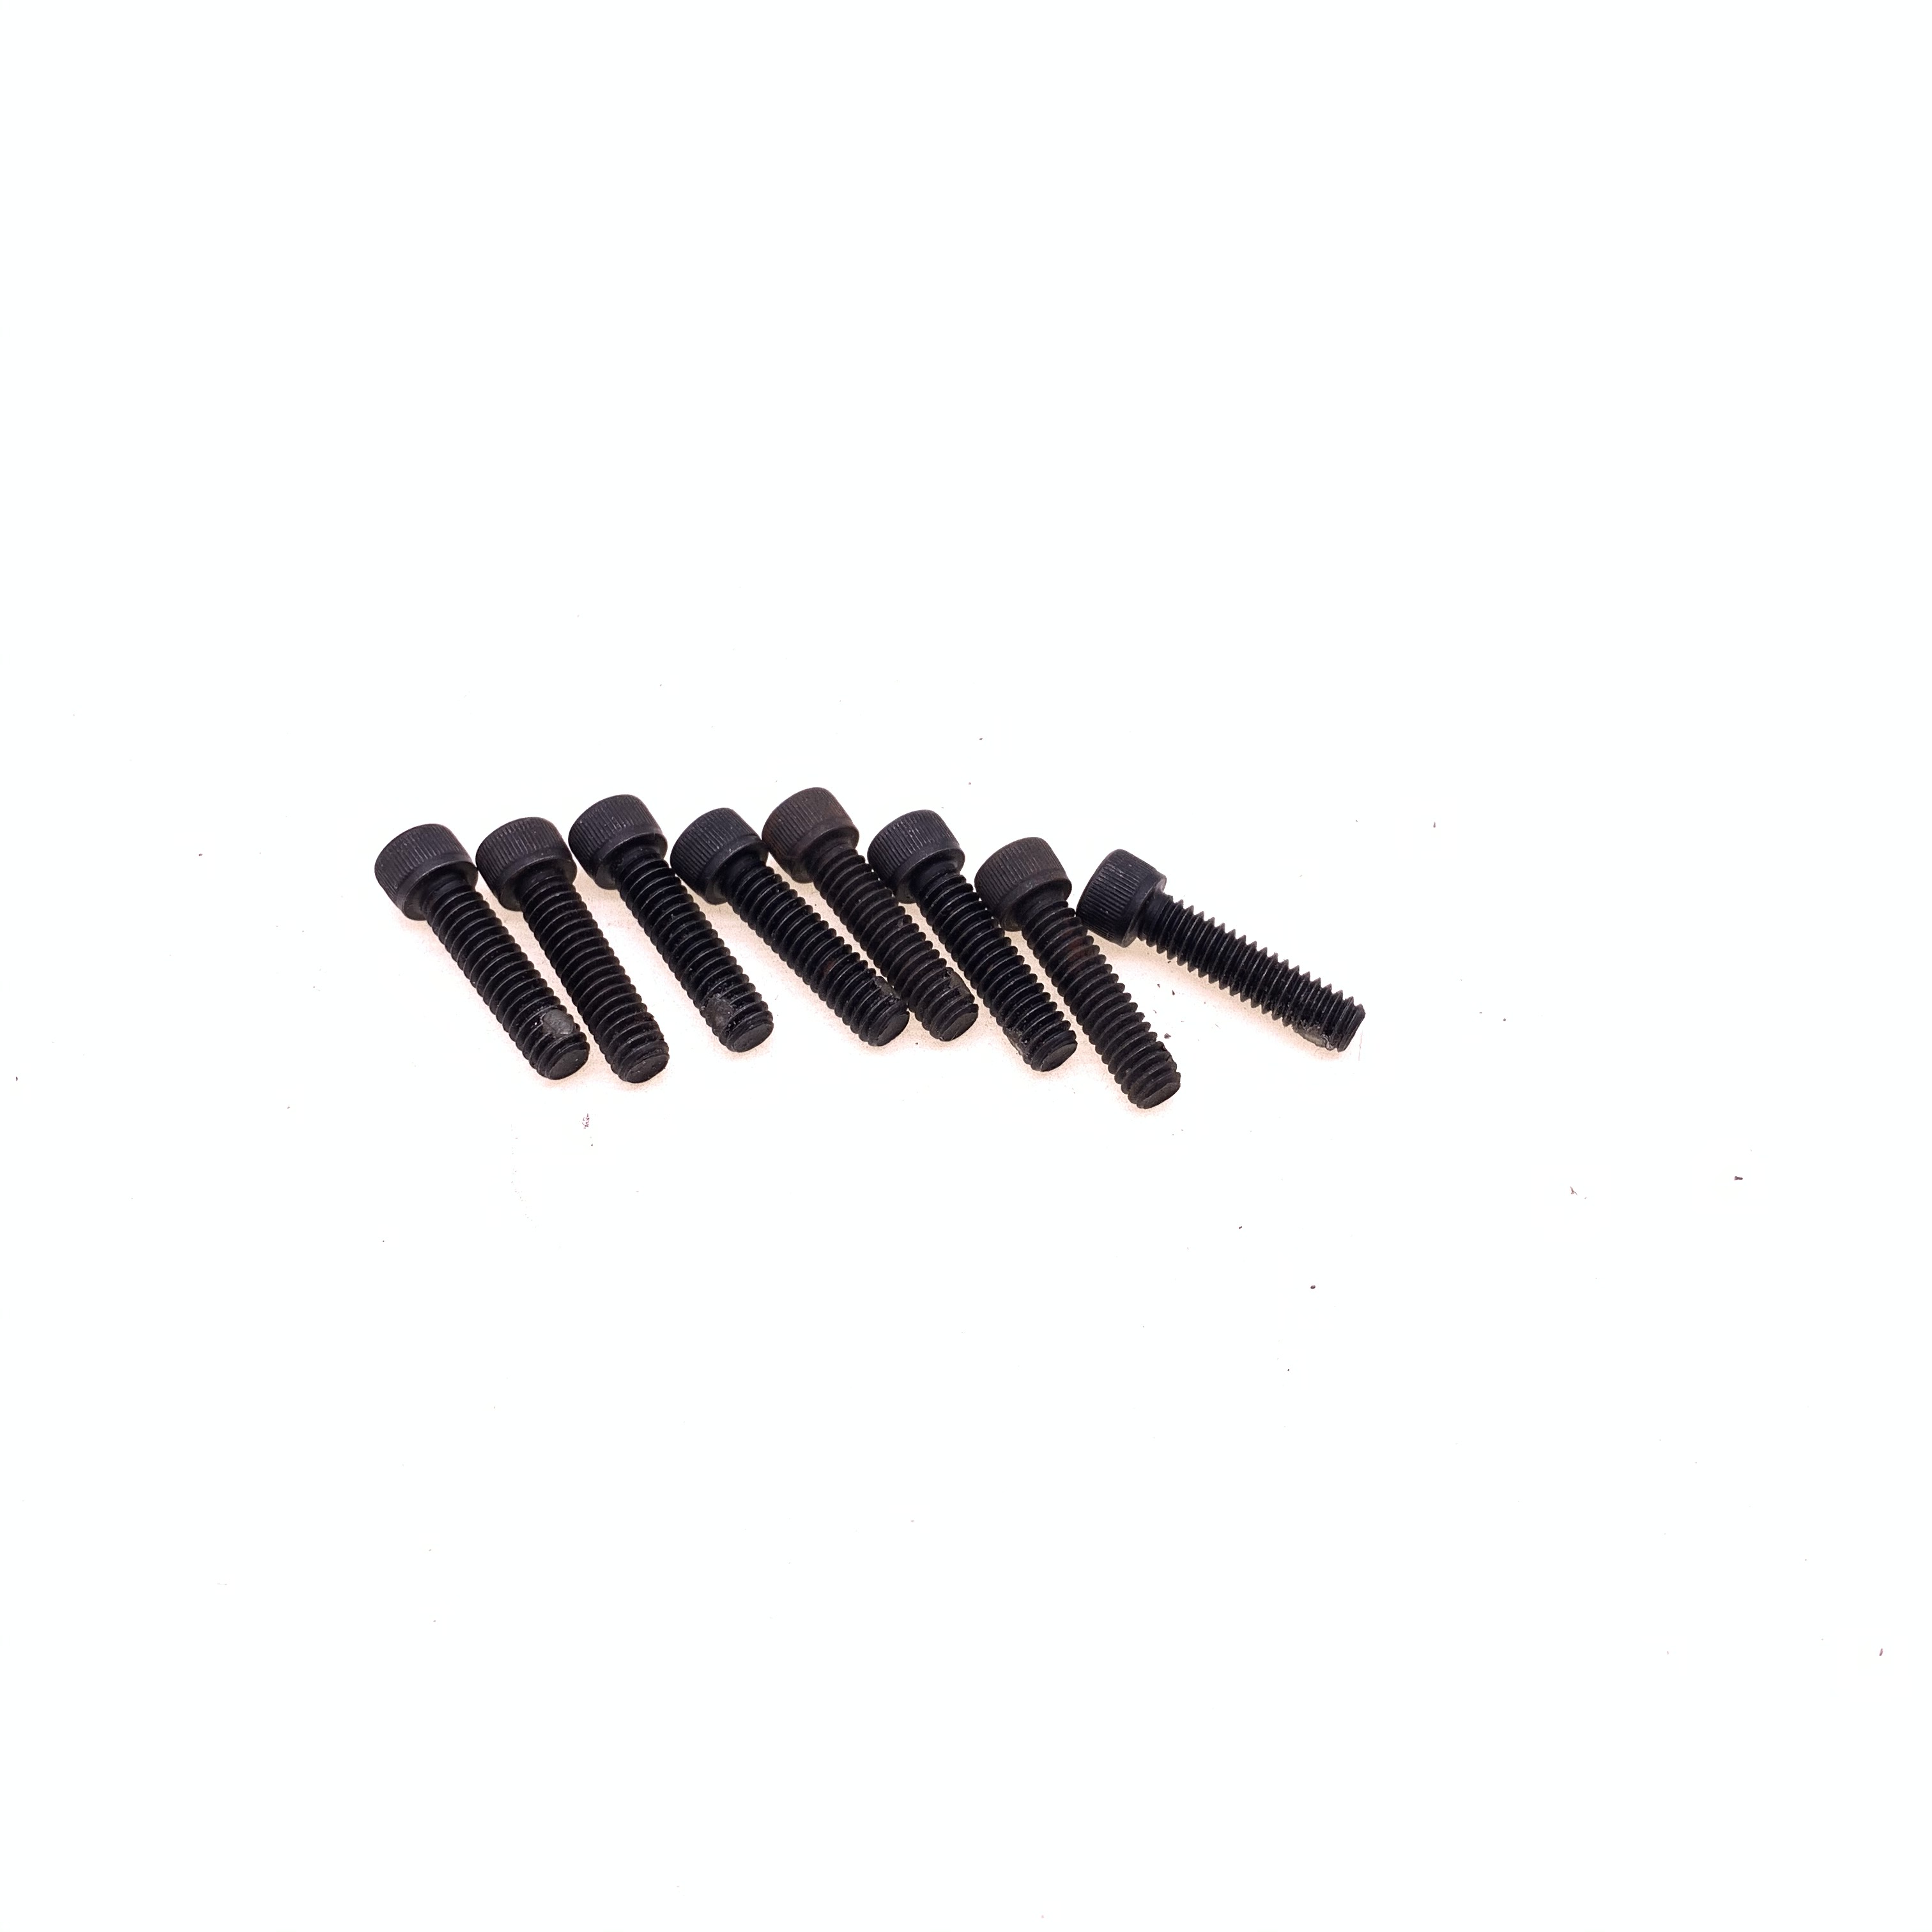 Ingersoll Rand Spare Parts Bolt 95929154